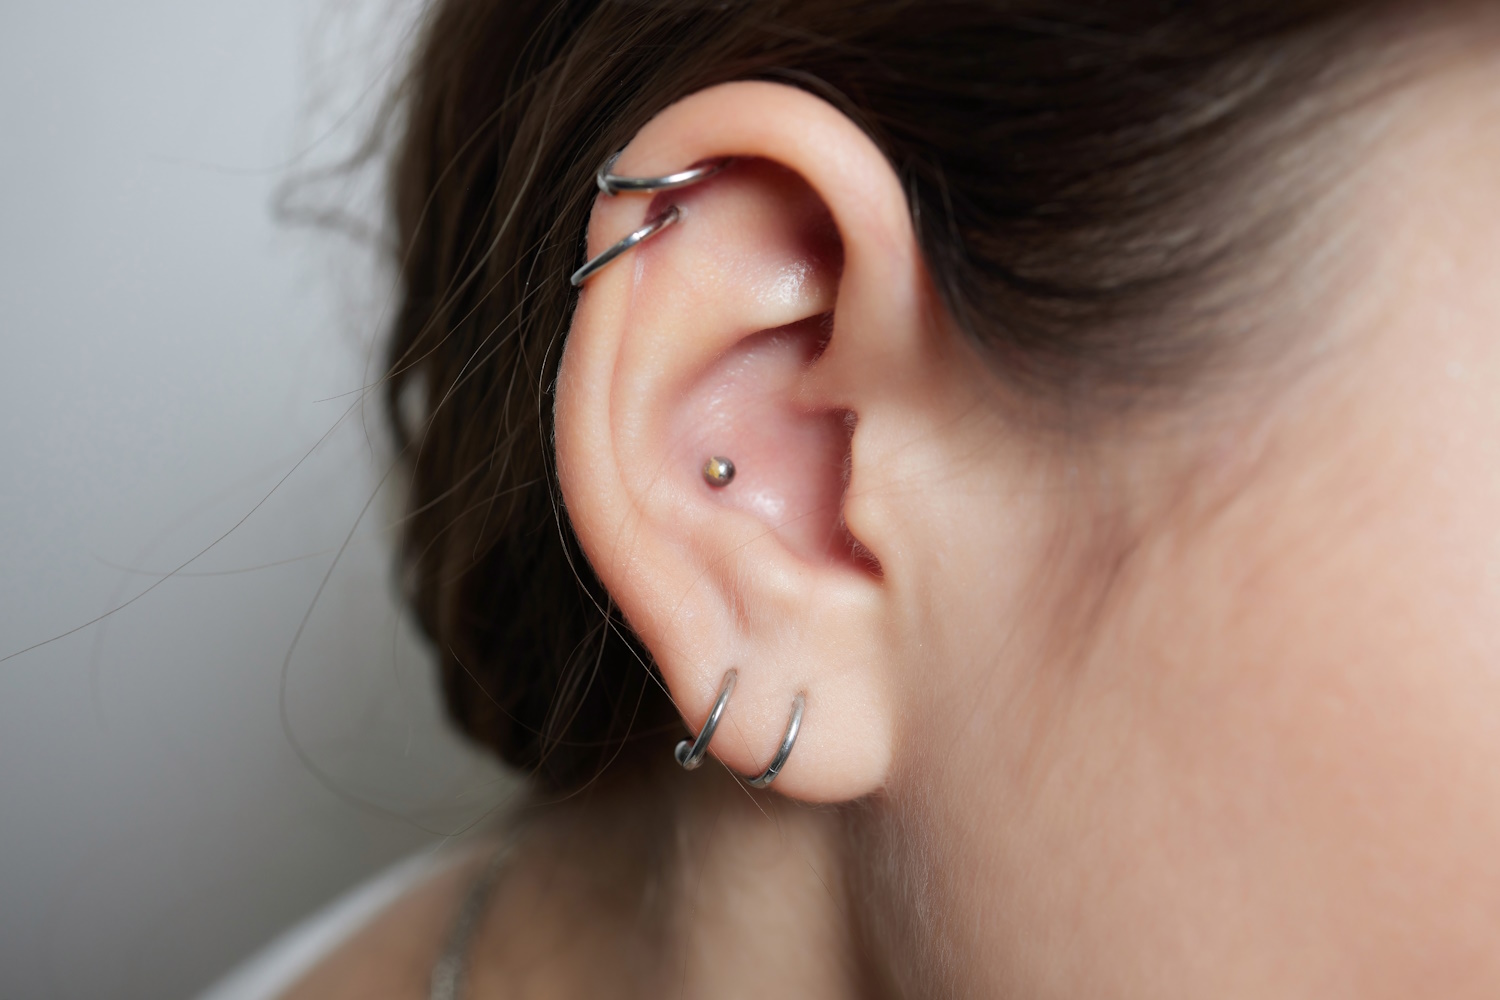 A woman with a couple earlobe piercings, a couple helix piercings, and an inner conch piercing.